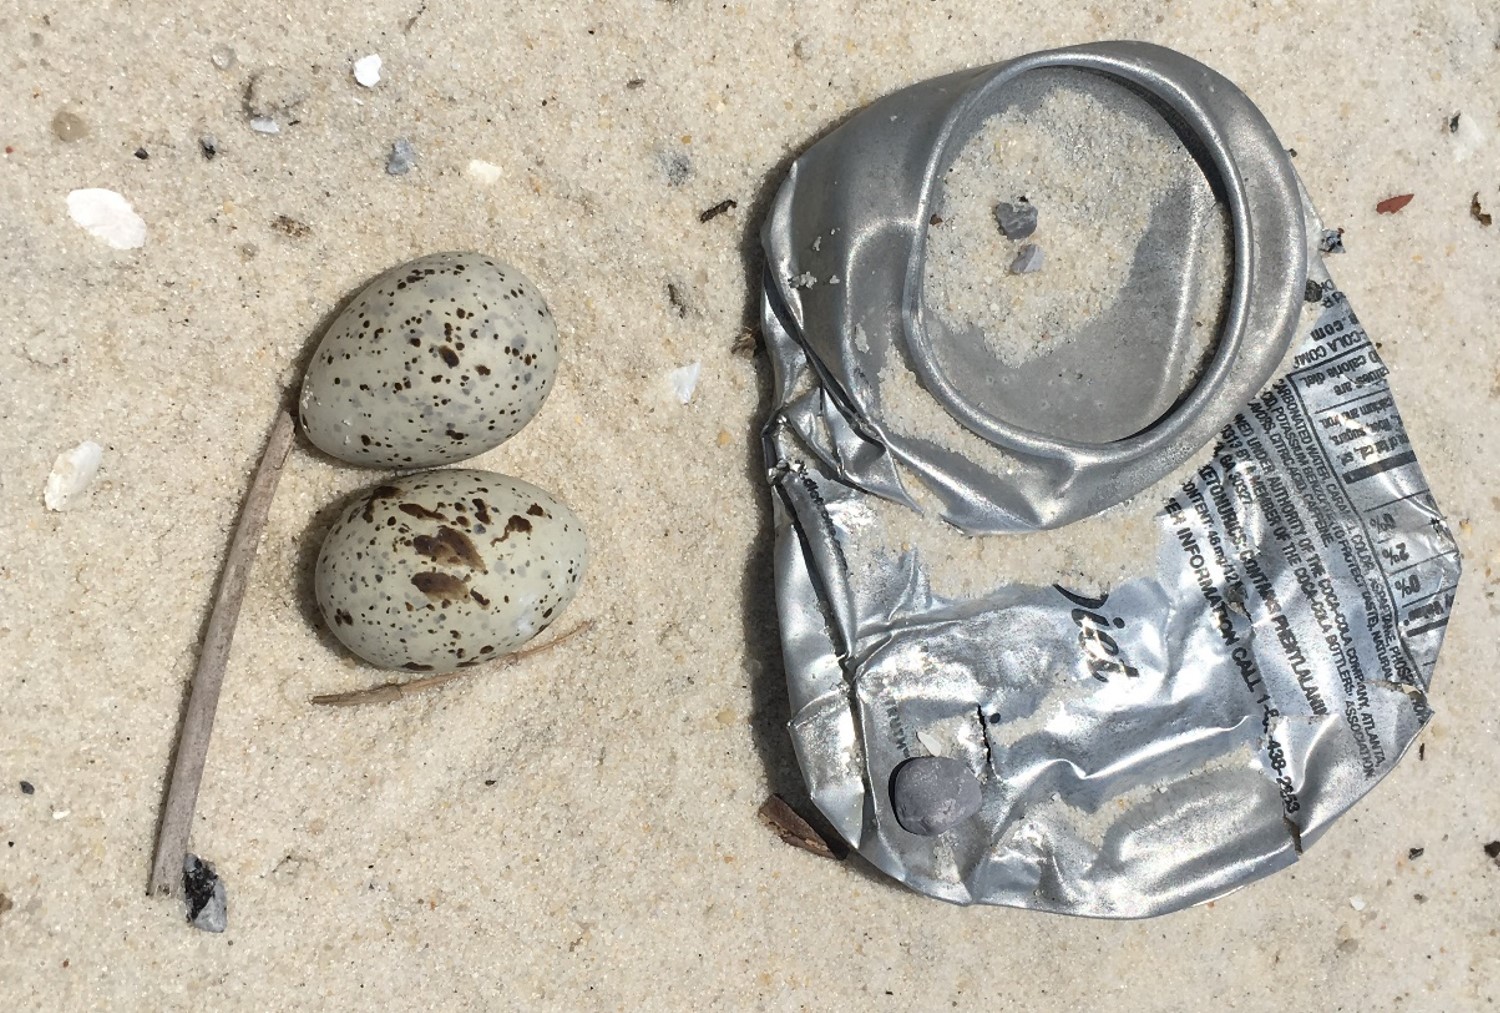 two eggs in the sand next to a flattened aluminum can